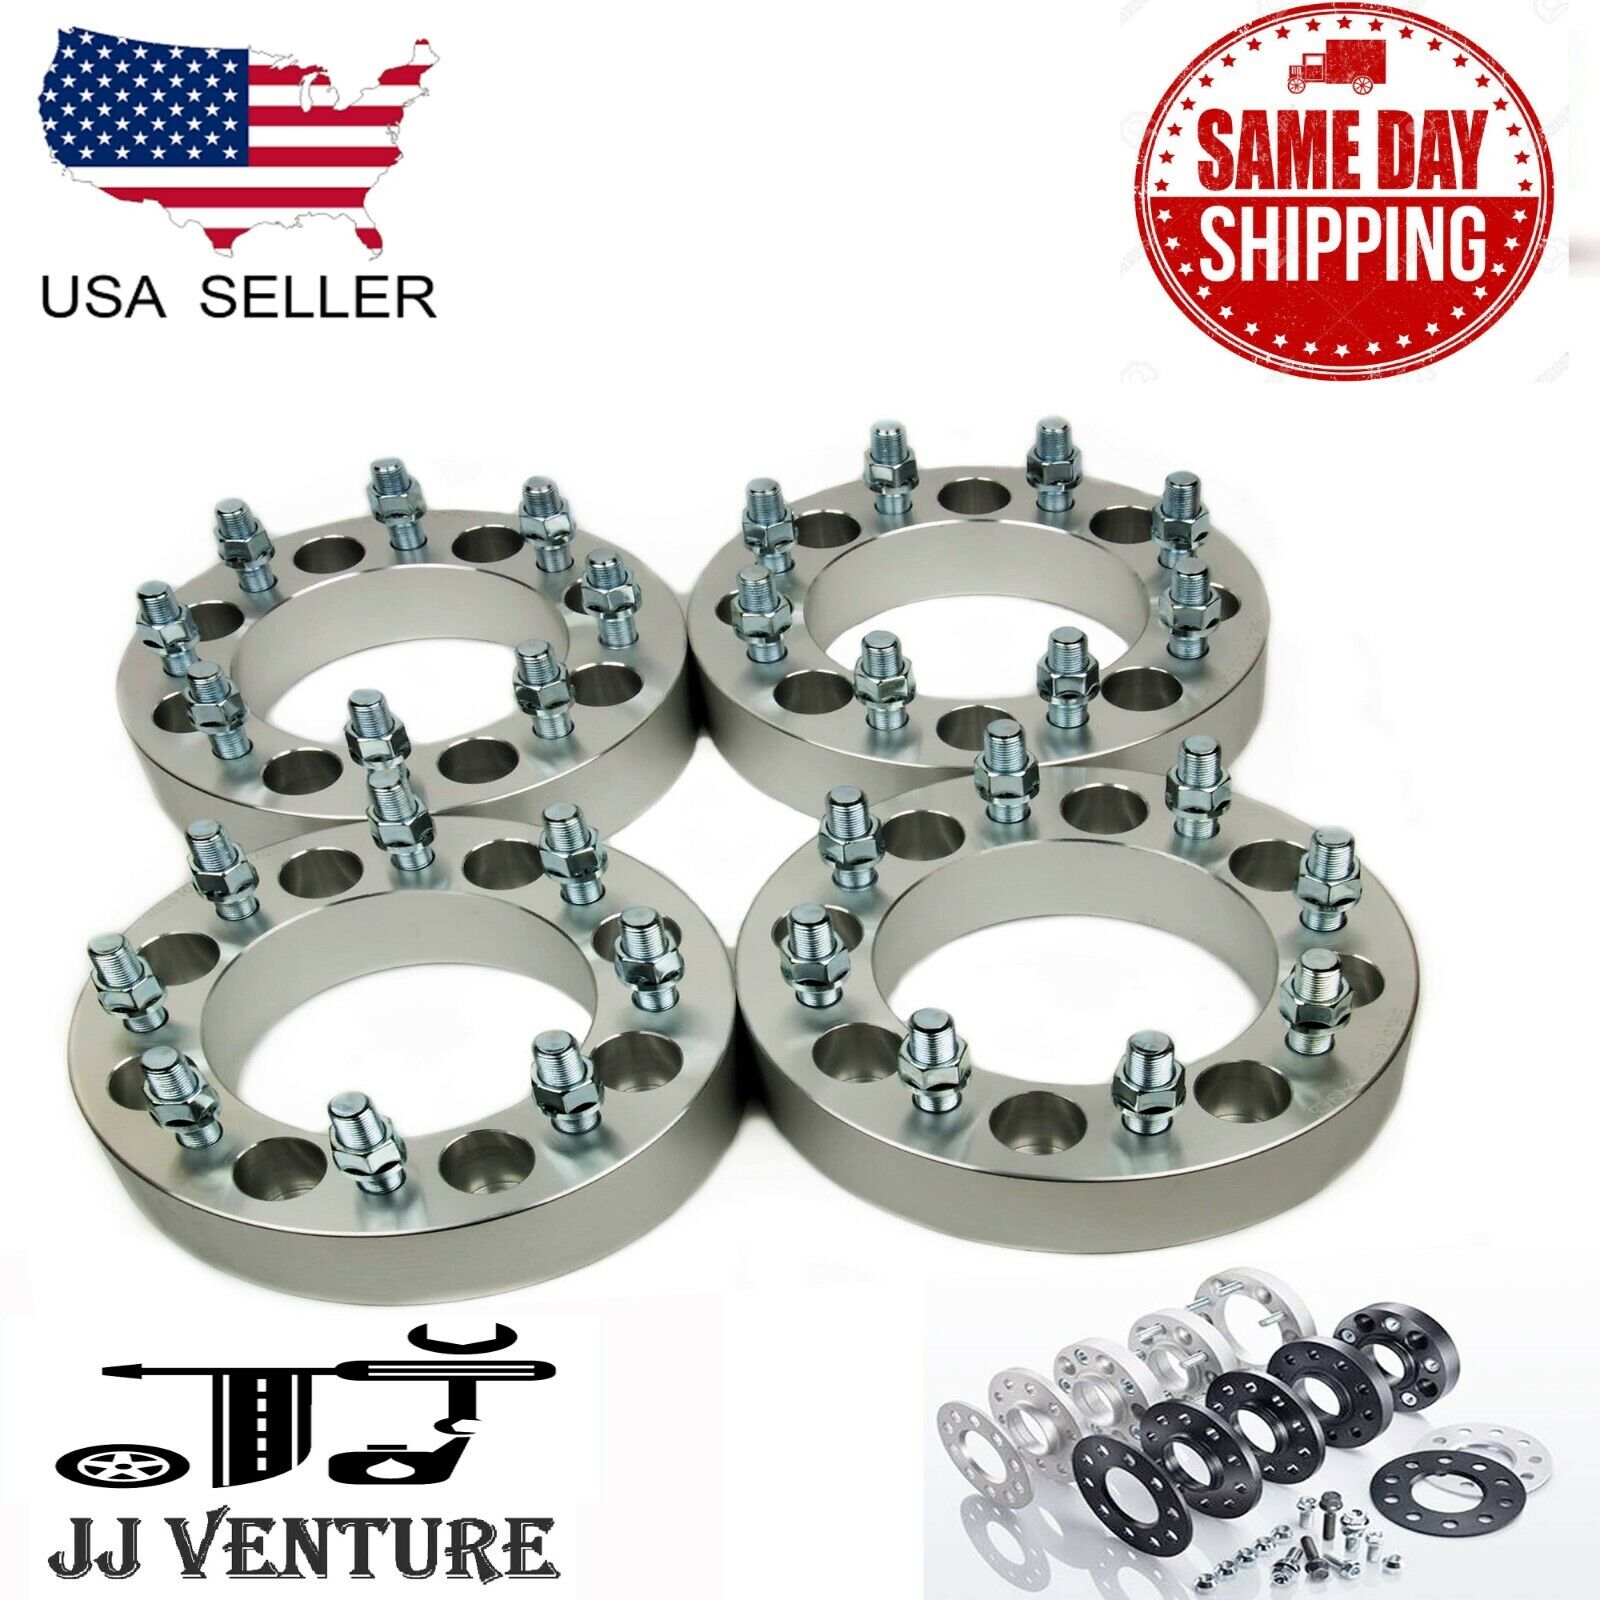 4PC 8X210 TO 8X210 WHEEL SPACERS ADAPTERS FIT SILVERADO SIERRA DUALLY 2